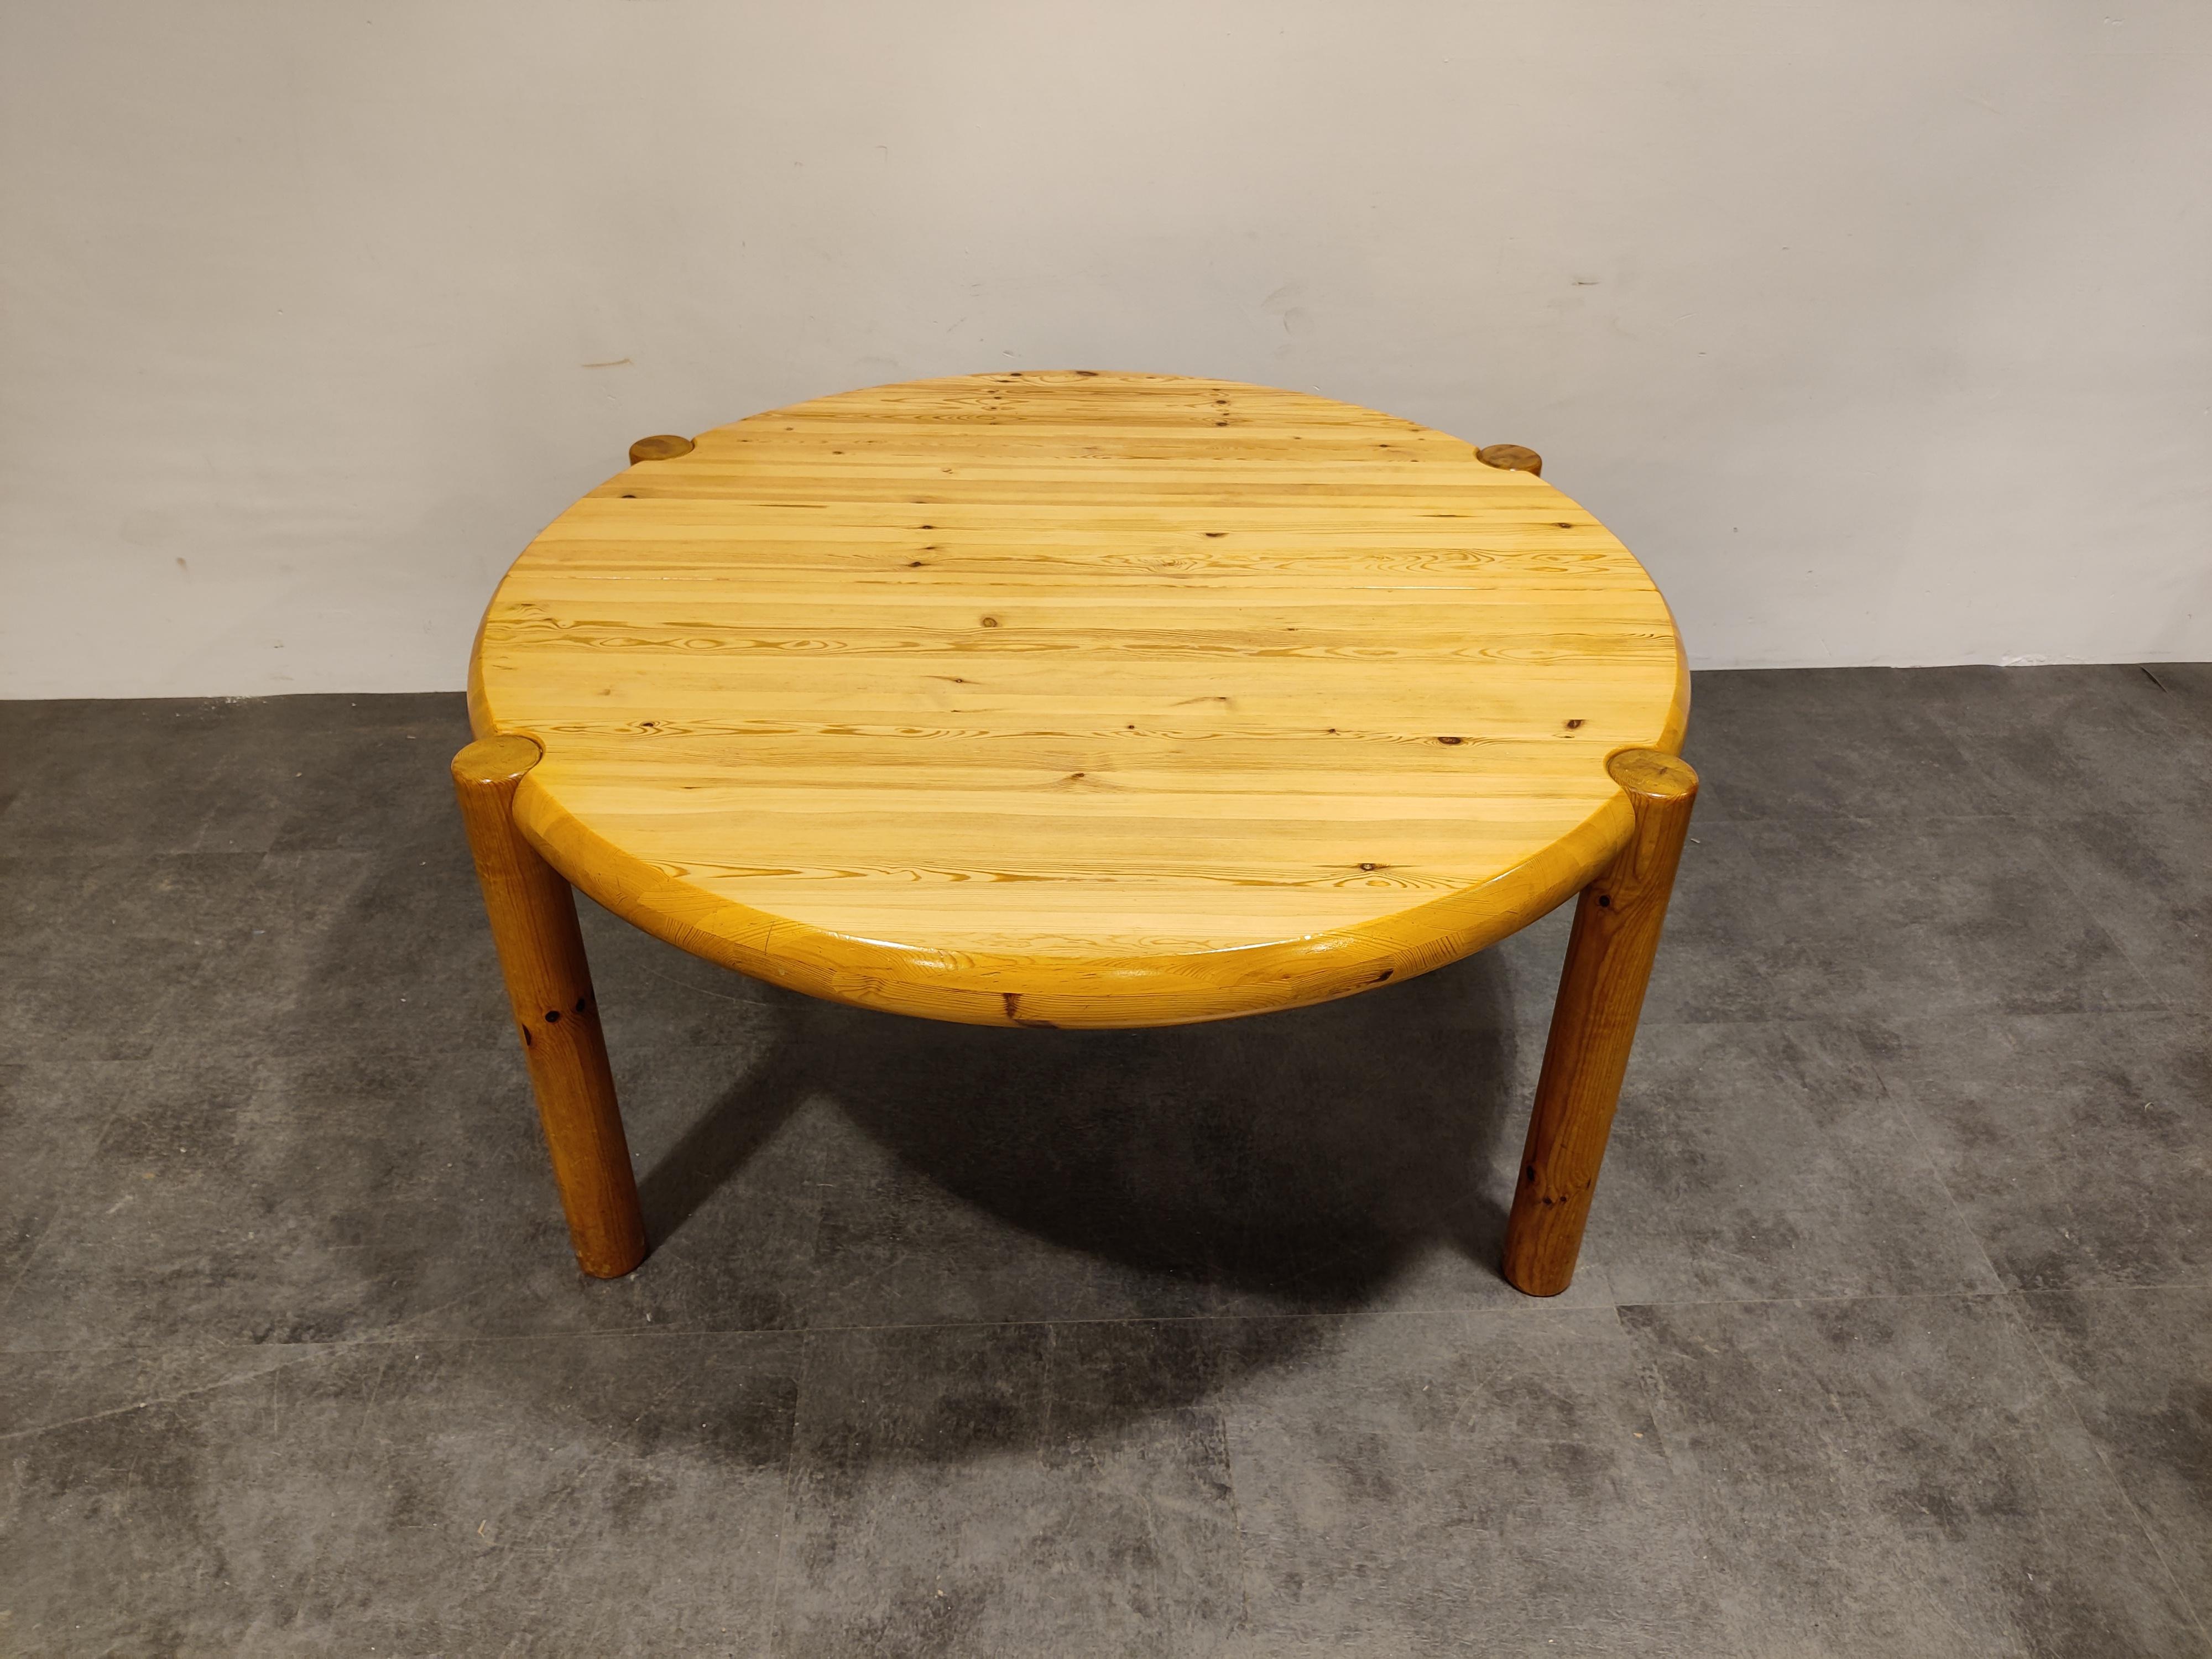 Extendable dining table designed by Rainer Daumilier.

The table is entirely made out of high quality and everlasting solid pine wood.

Beautiful integrated legs.

Good condition

1970s - Denmark

Dimensions:
Height: